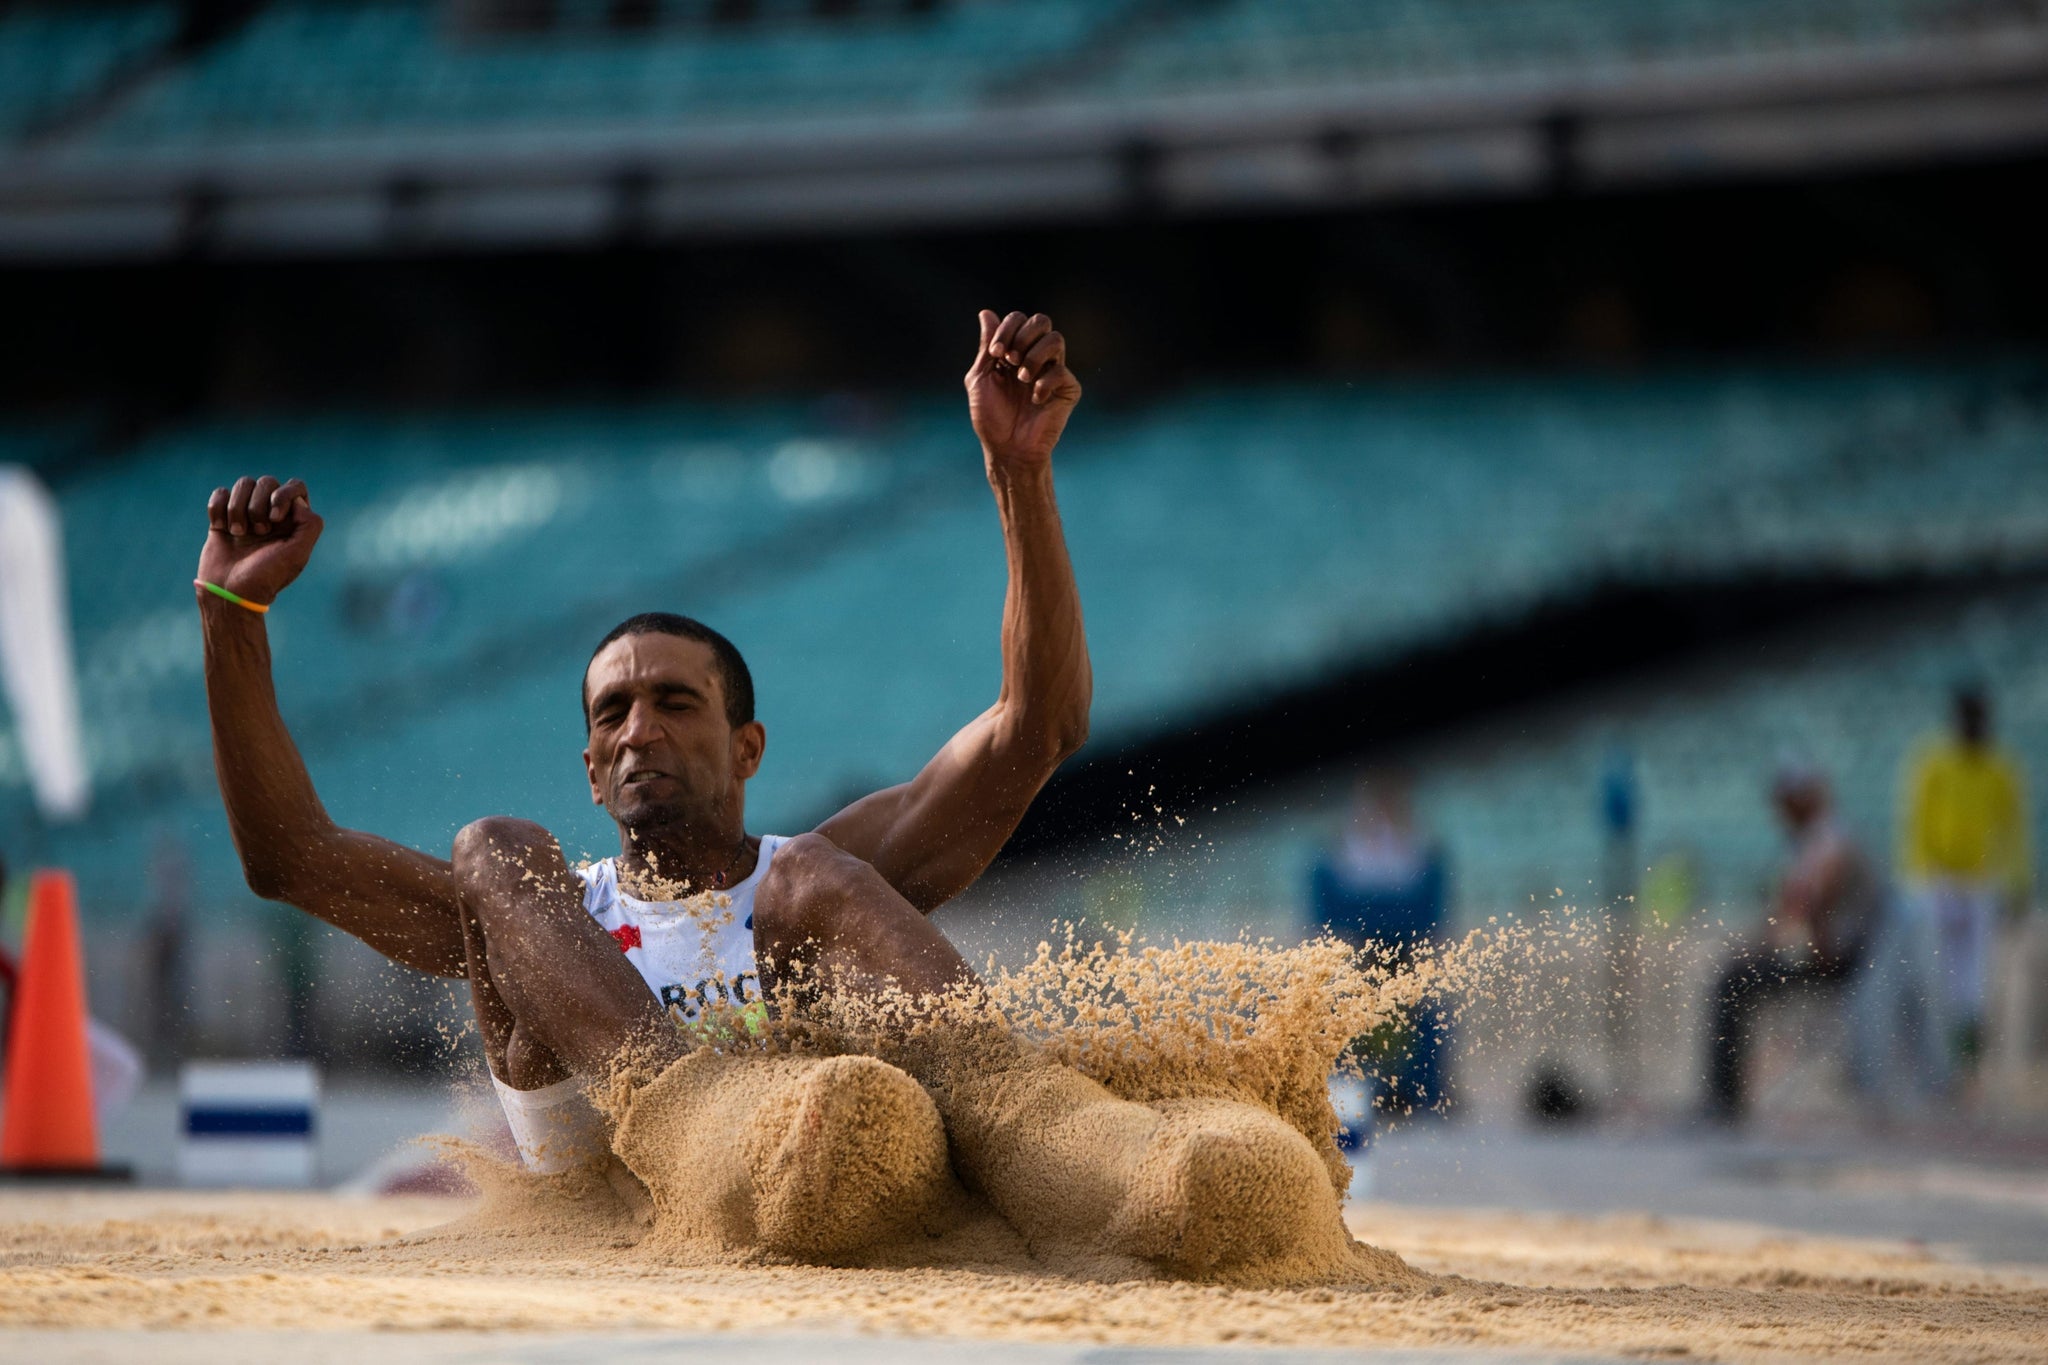 Athlete during long jump into sand